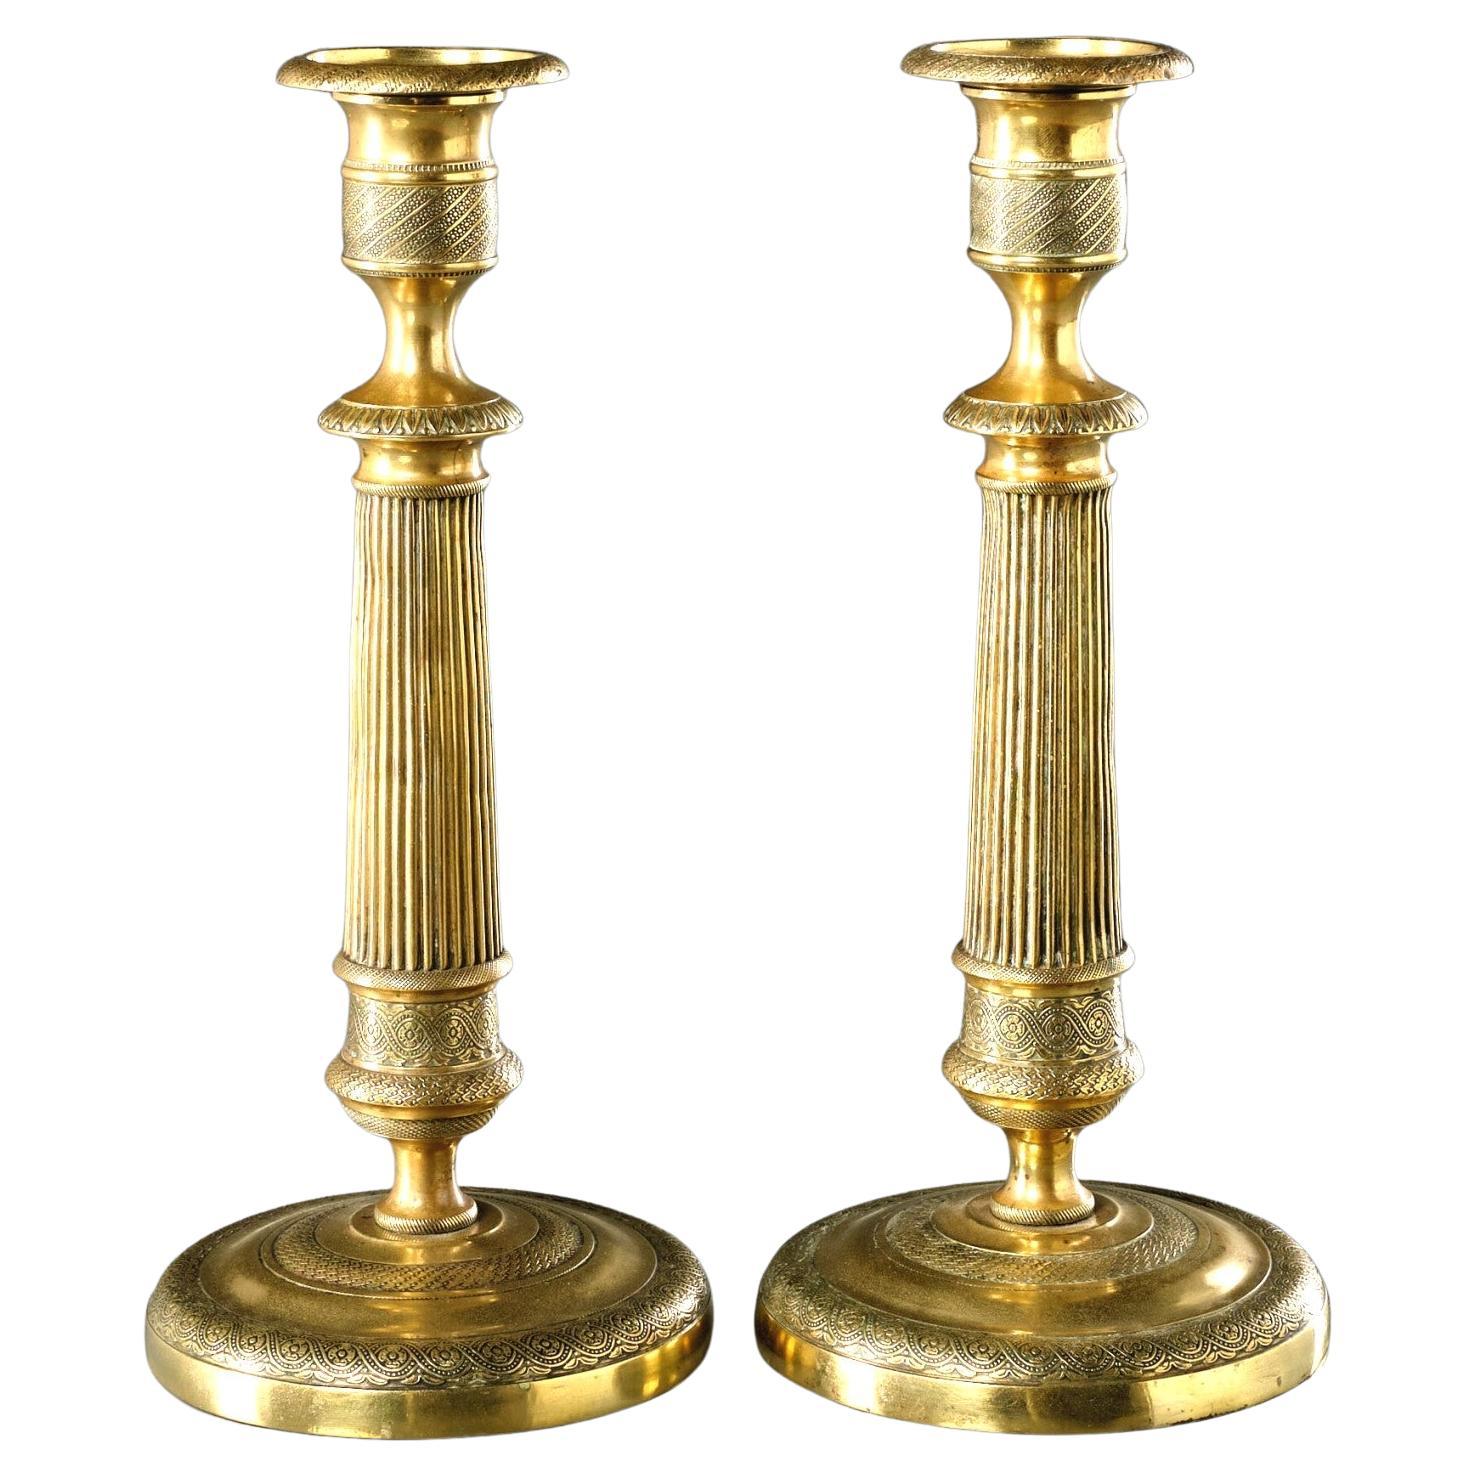 Very Handsome Pair of French Empire Period Gilt Brass Candlesticks, Circa 1820 For Sale